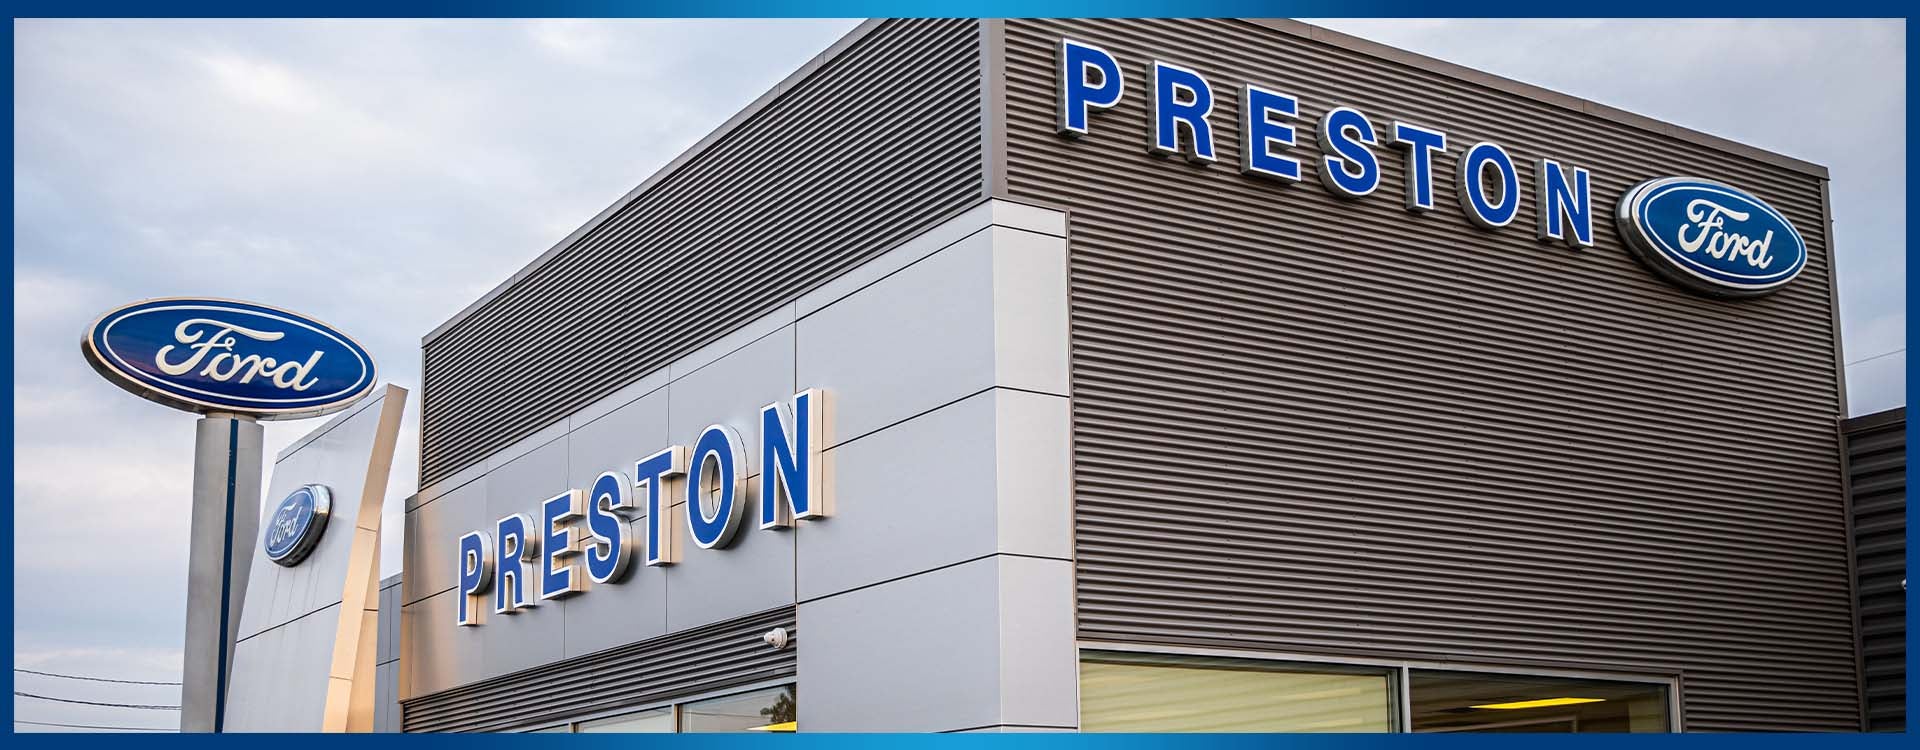 About Us Your Premier Ford Dealer Preston Ford of Aberdeen